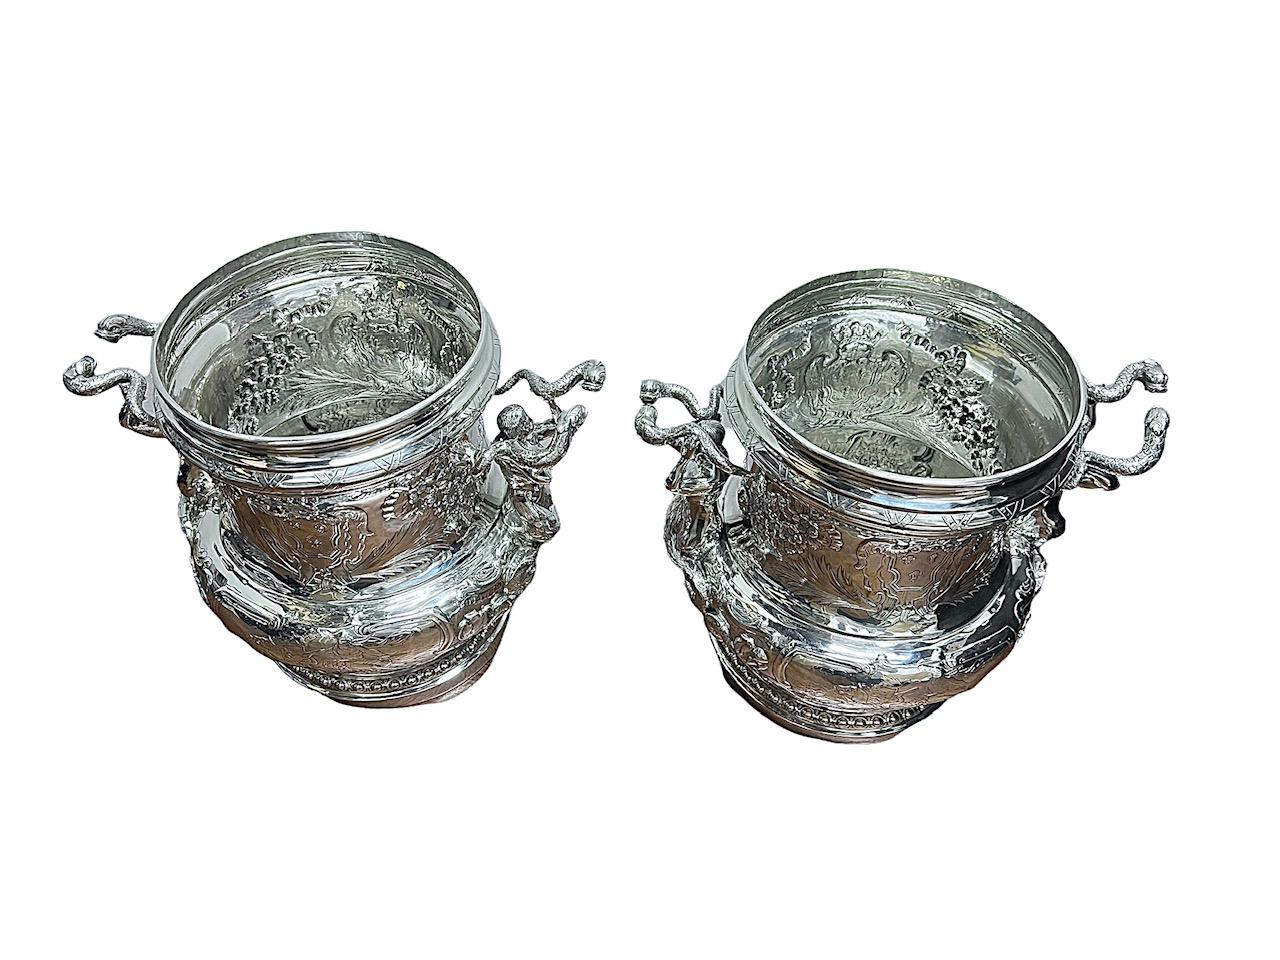 Hammered 1890 Pair of German Solid Sterling Silver Coolers (Buckets), Sea Creatures For Sale